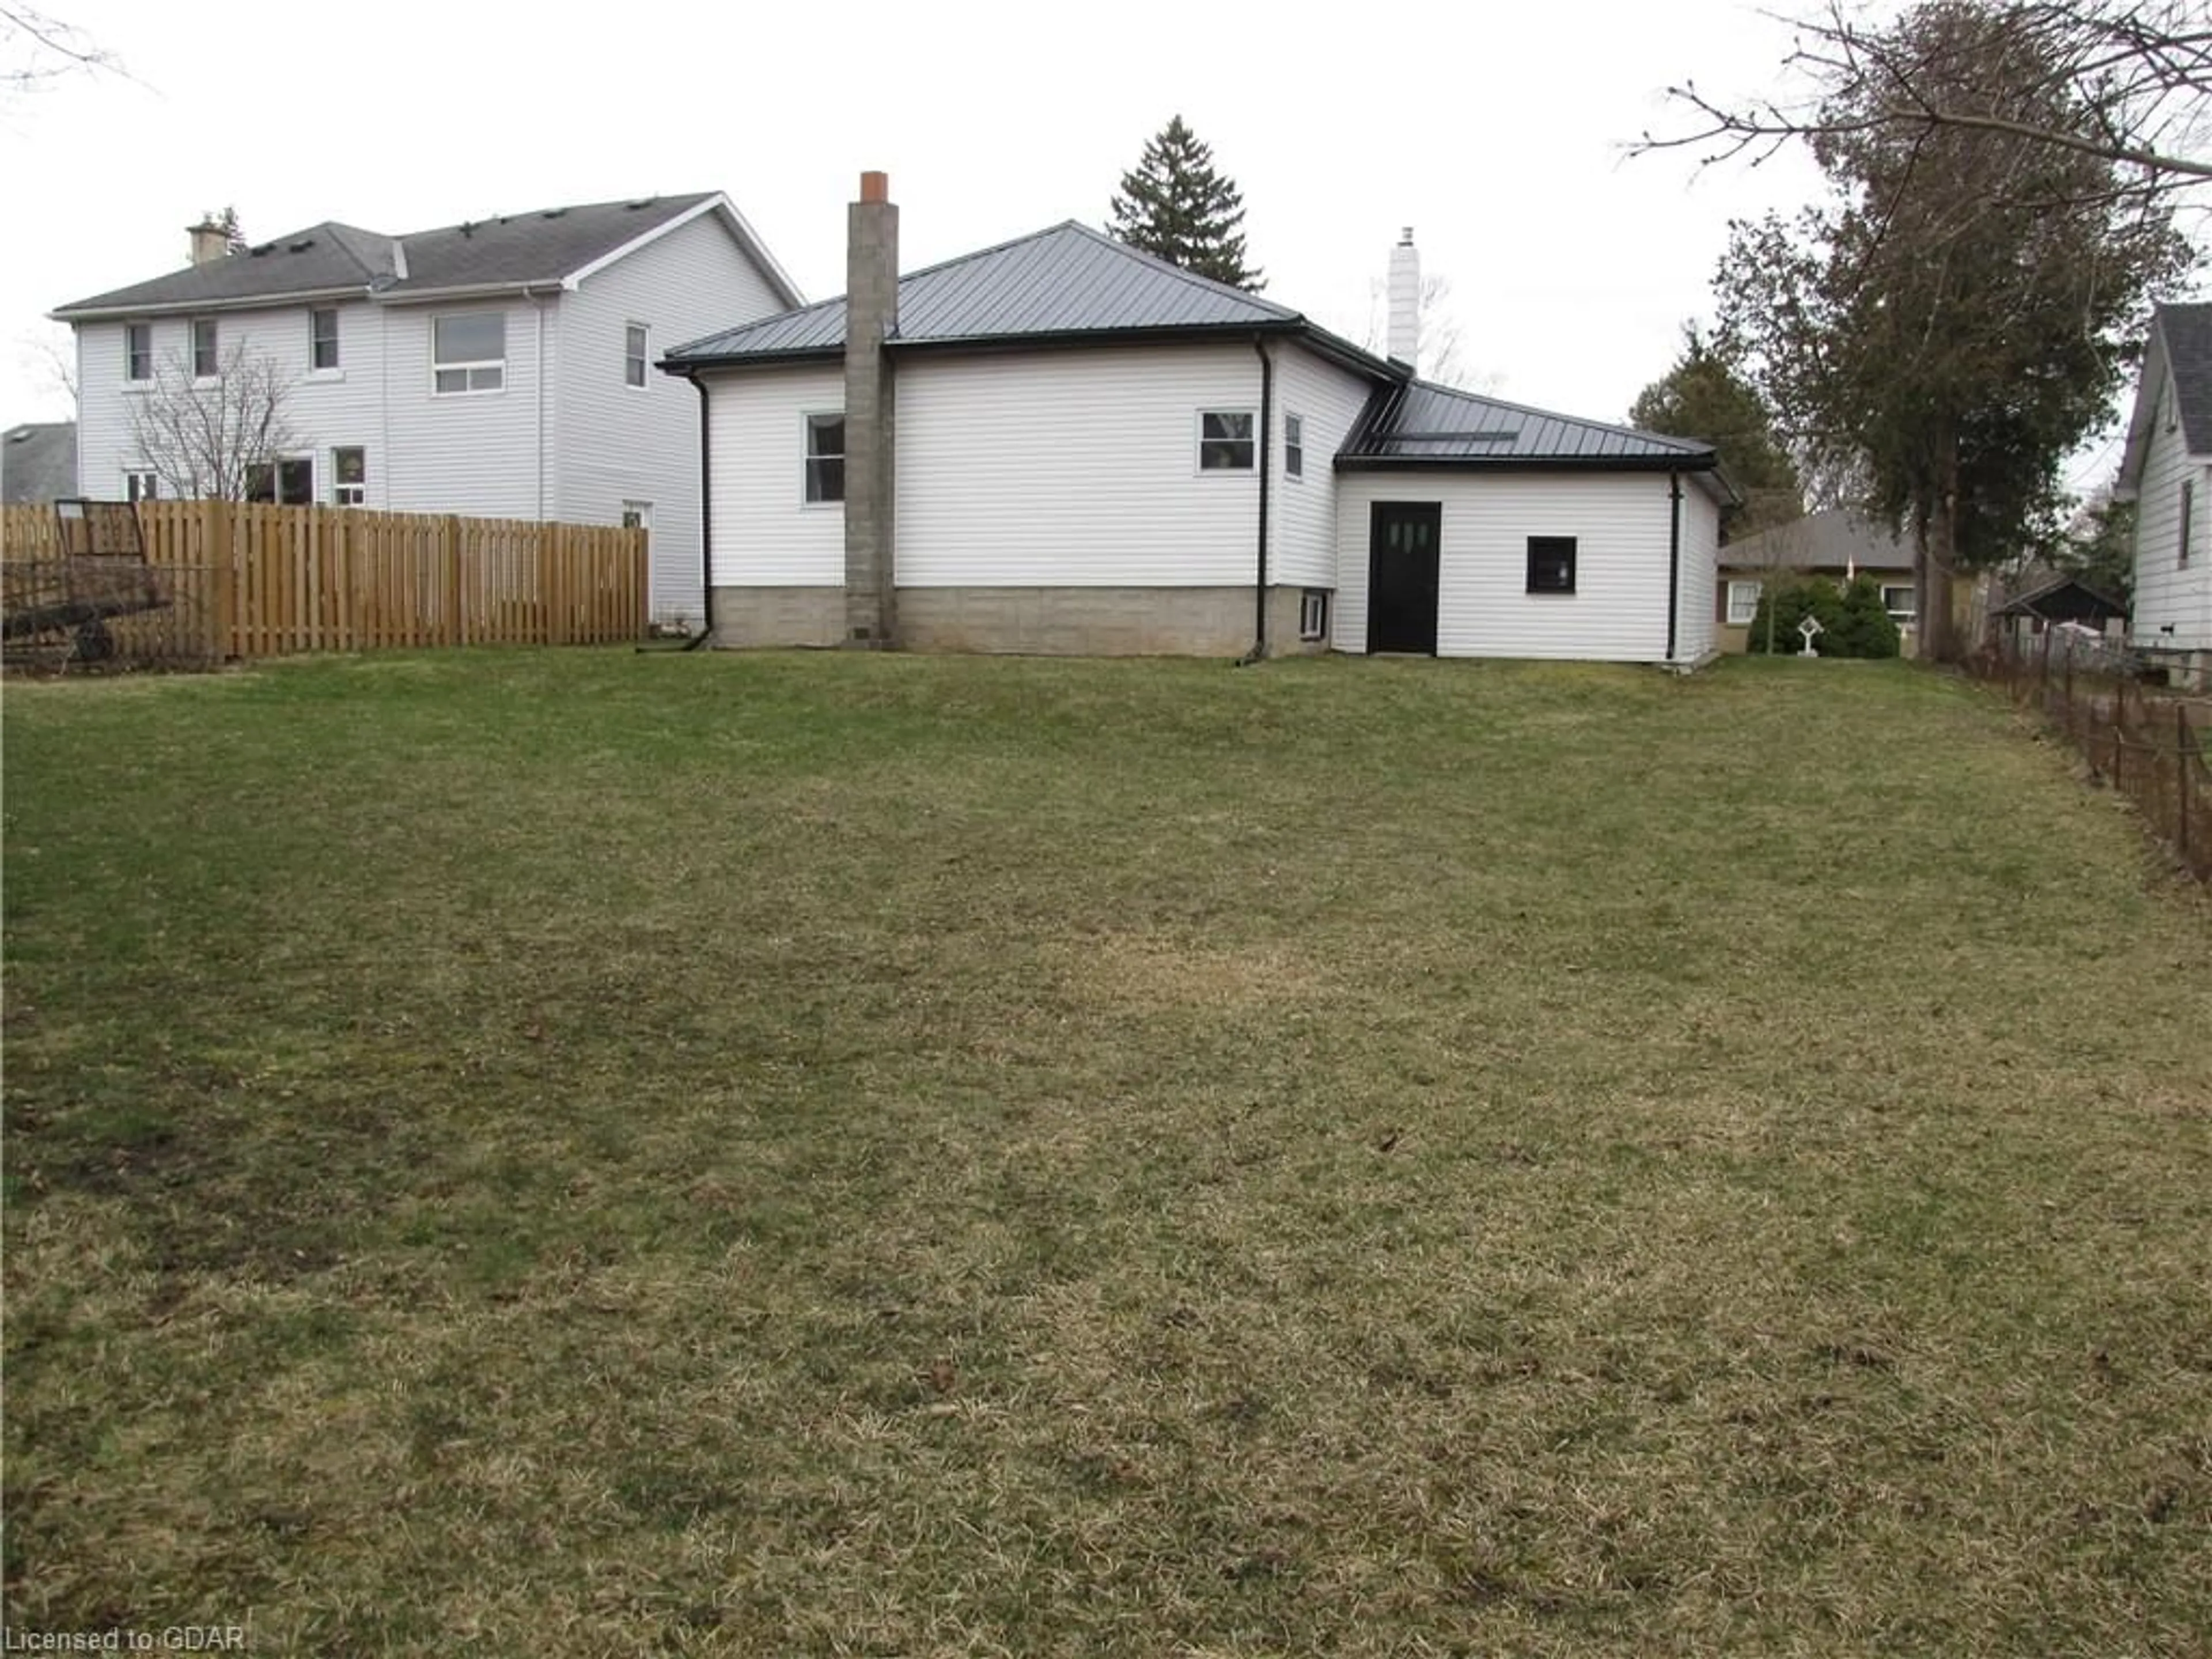 Fenced yard for 112 Emma St, Guelph Ontario N1E 1T8